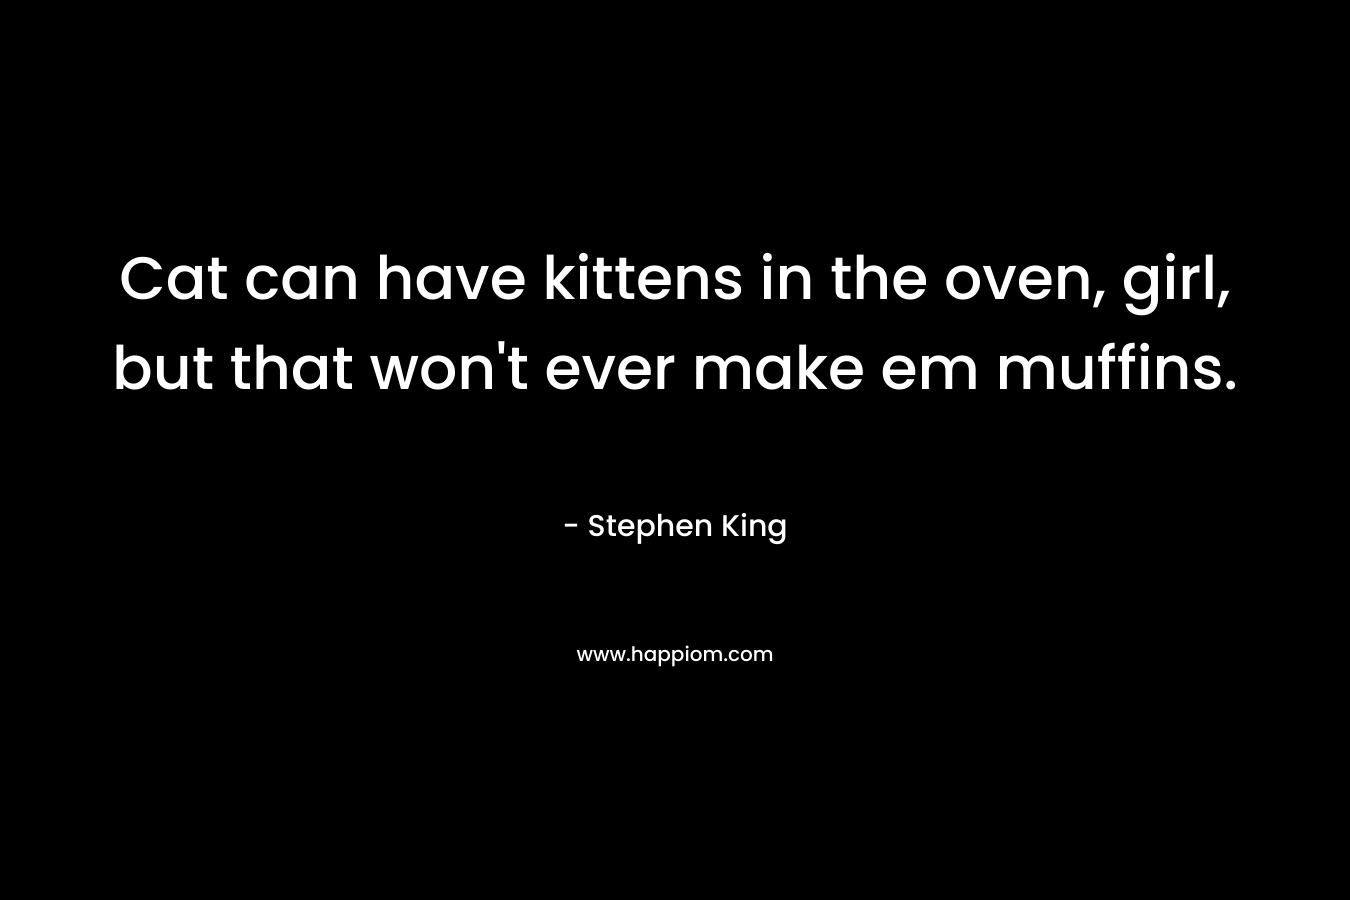 Cat can have kittens in the oven, girl, but that won't ever make em muffins.